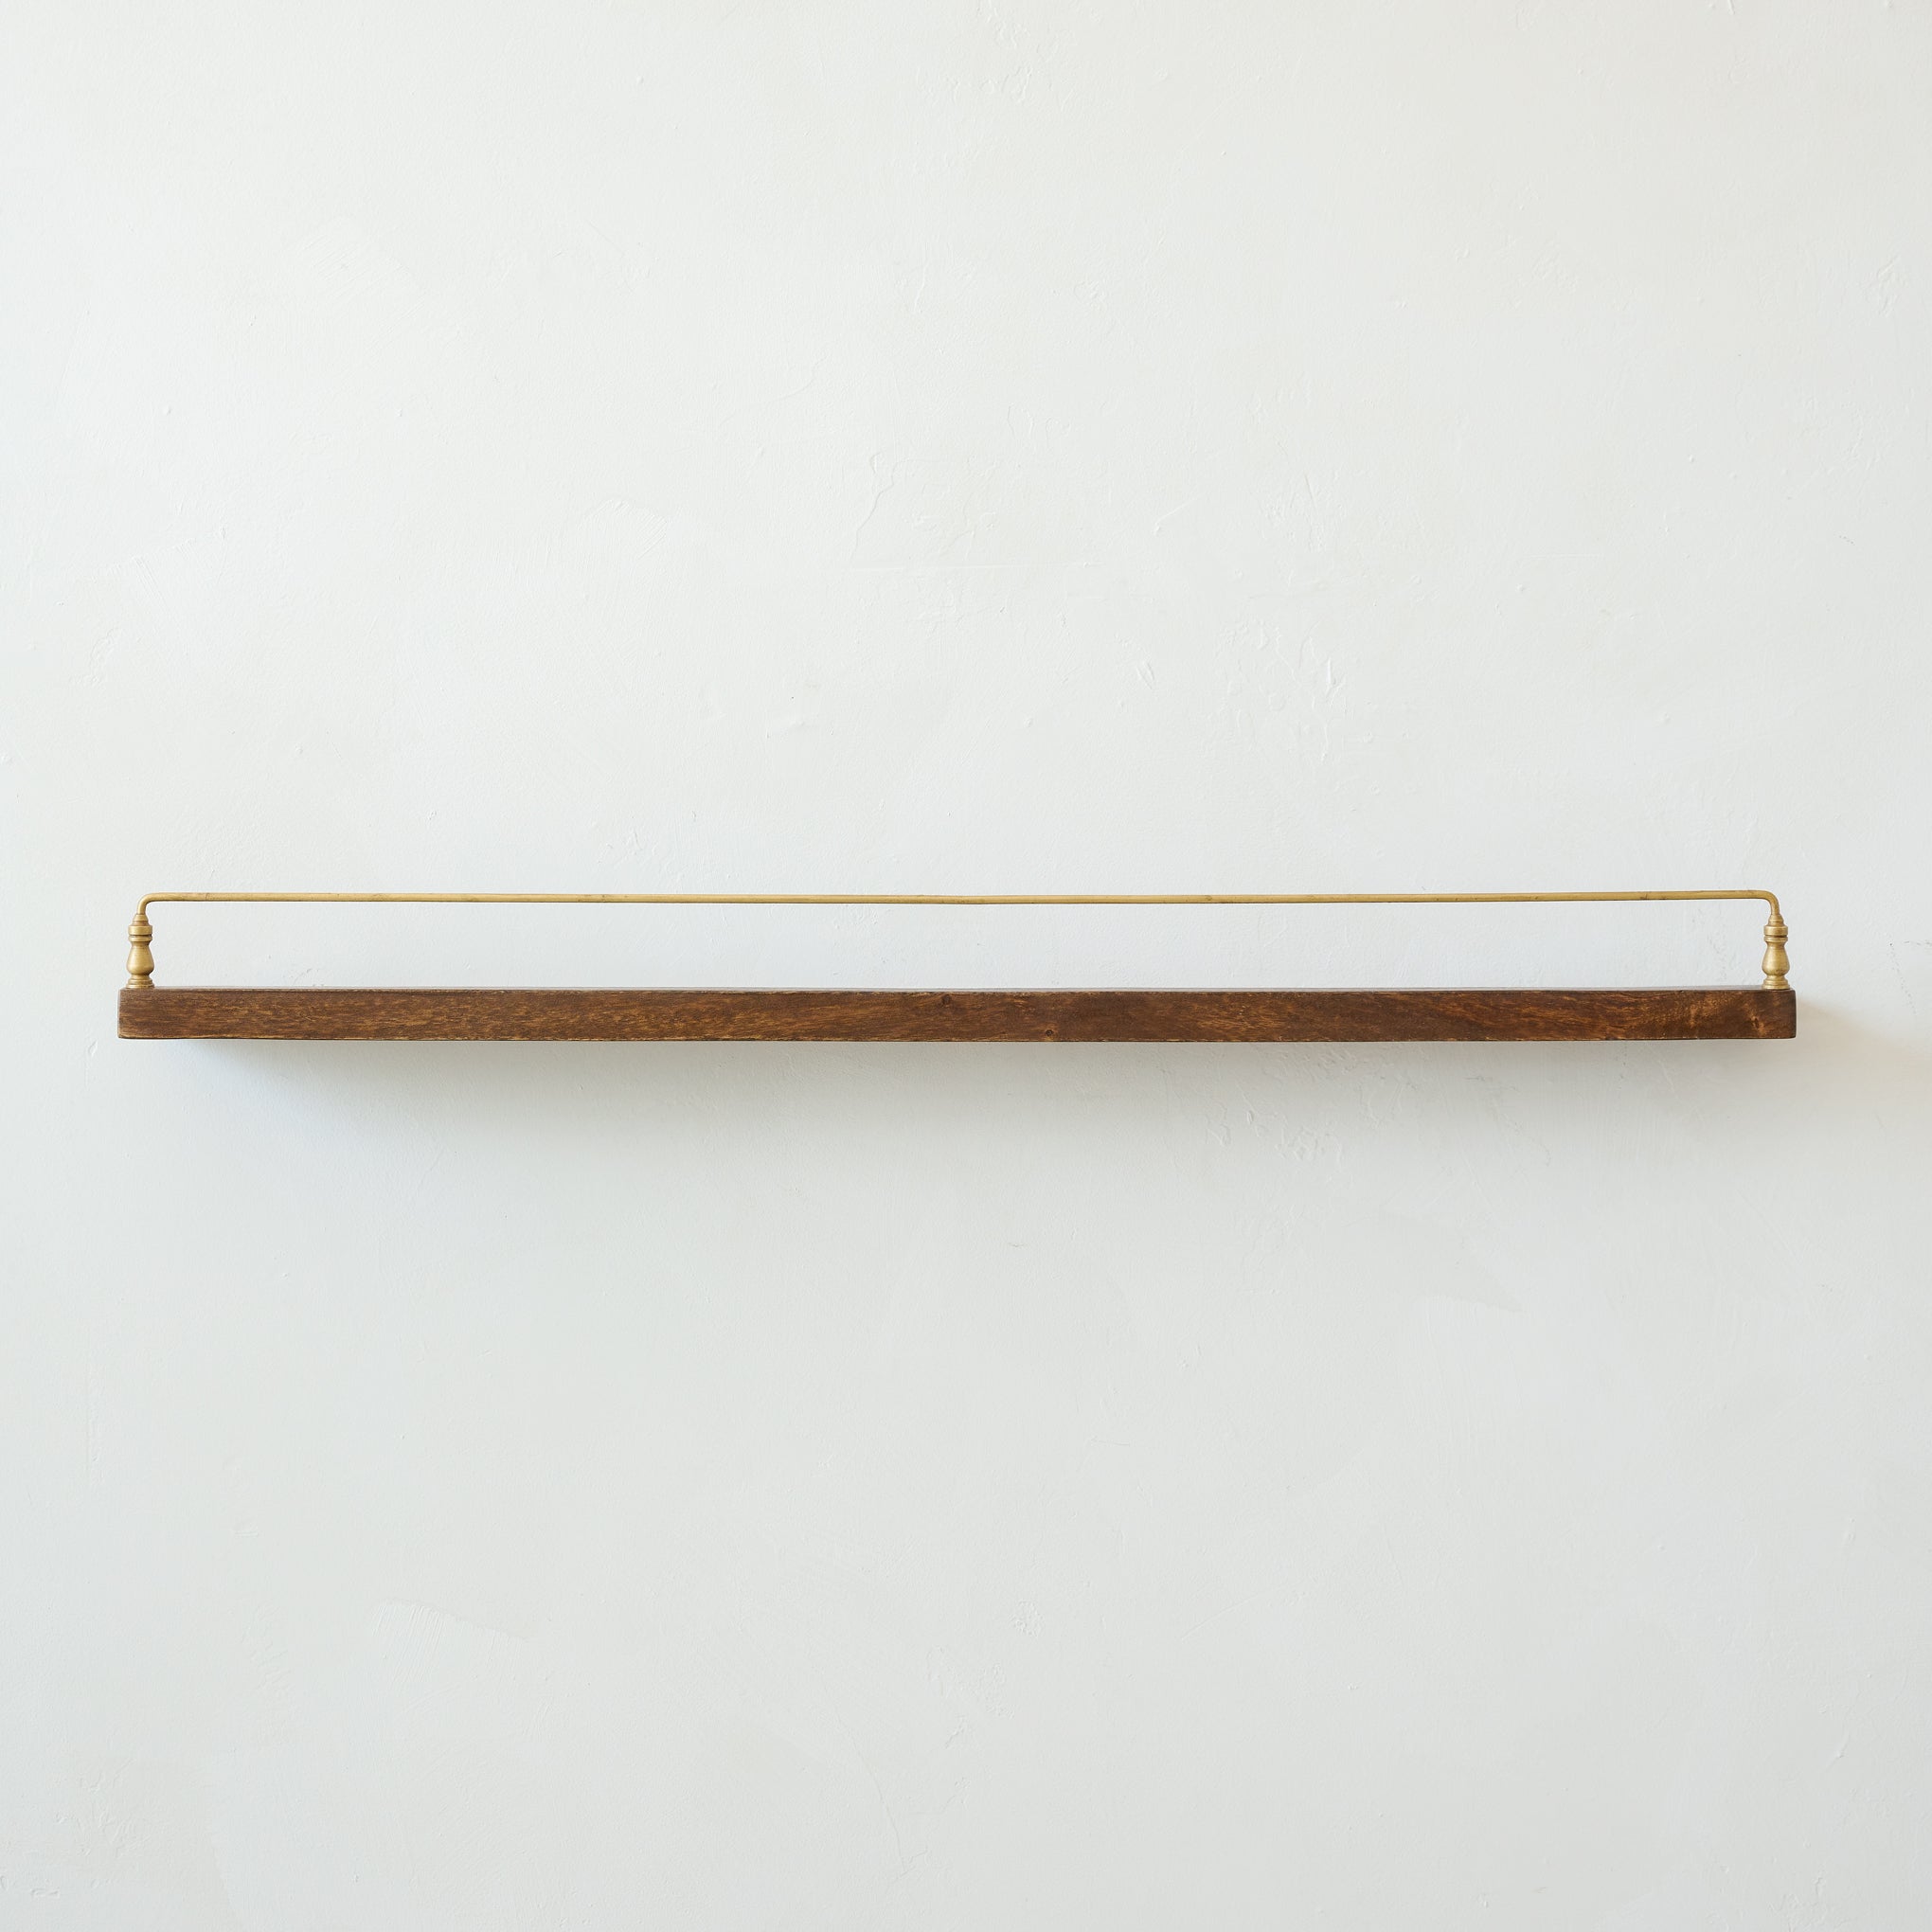 Elliott Wood and Brass Picture Ledge in large size hung on a wall